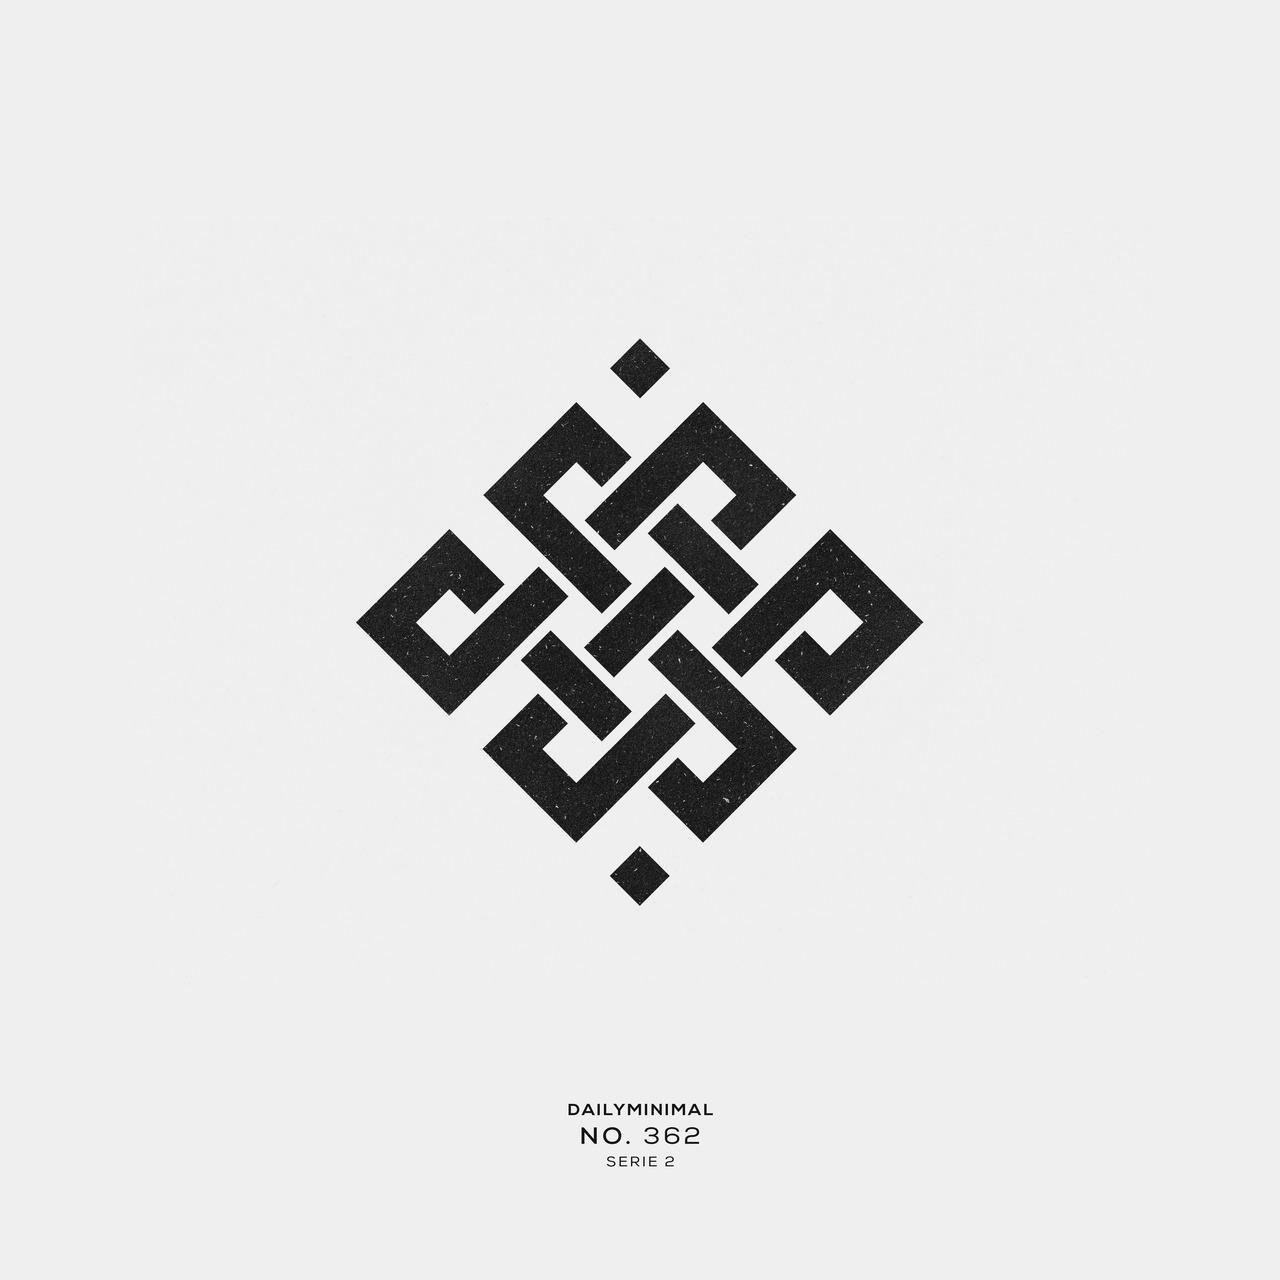 DAILY MINIMAL. 362 A new geometric design every day Chinese